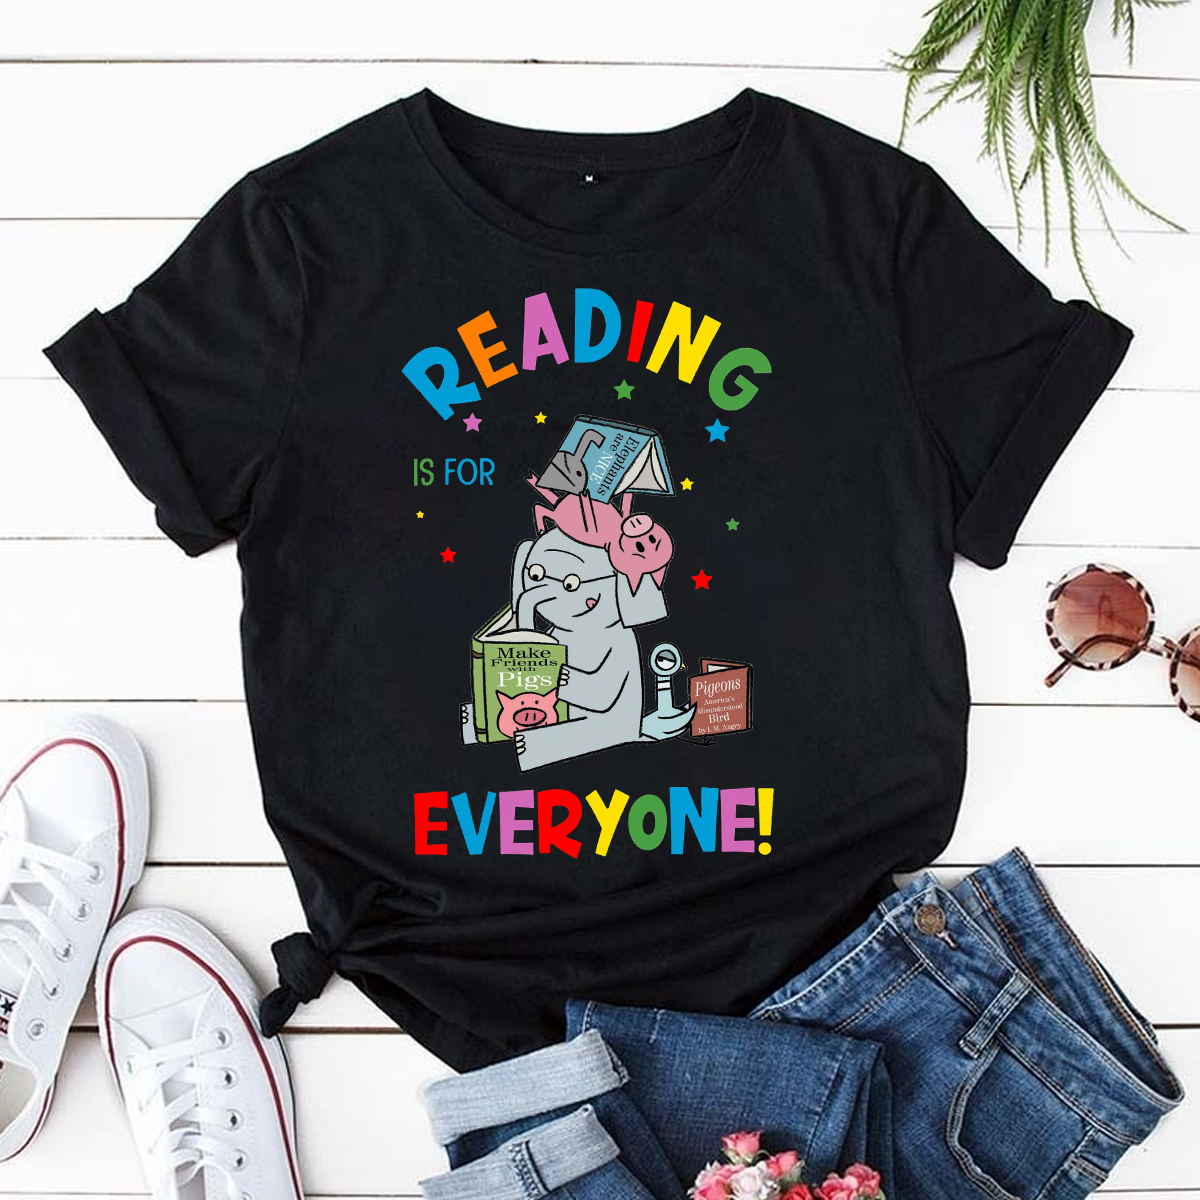 Reading Is For Everyone Piggie Gerald Pigeon Shirt, Piggie Gerald Pigeon Shirt, First Day At Class Tee,Its A Good Day To Read